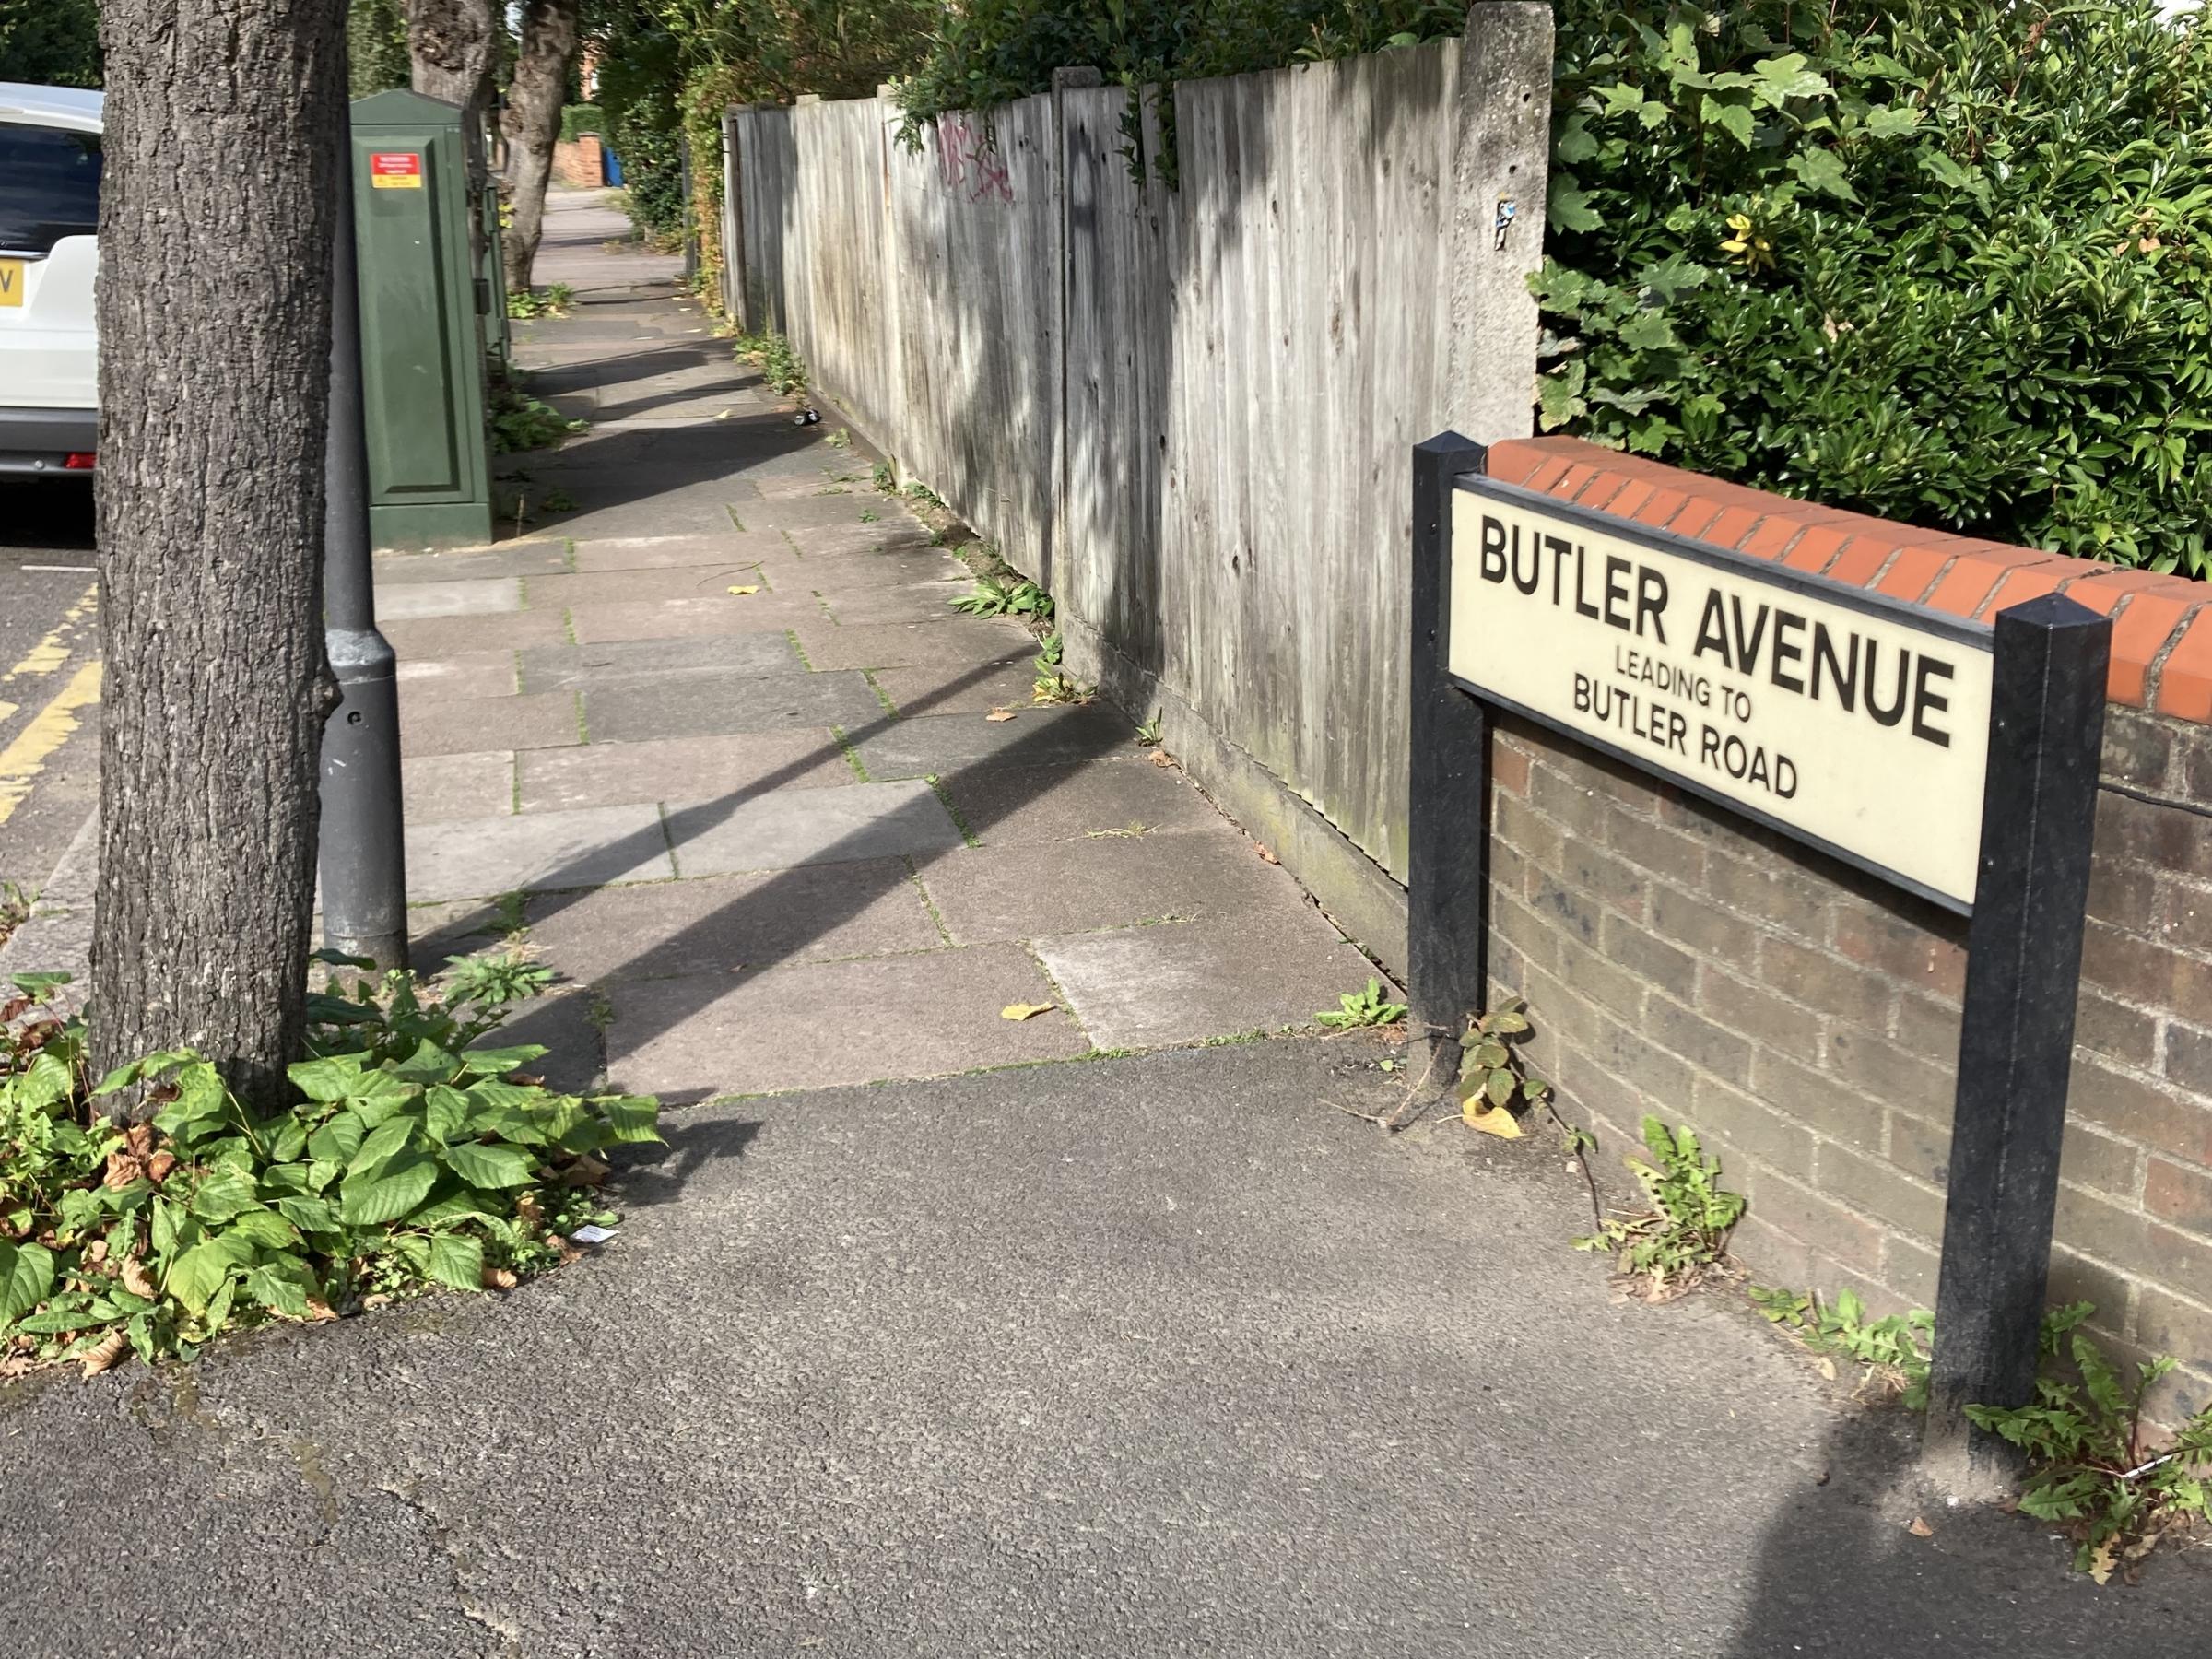 Butler Avenue, Harrow. Mike Williams claims the petition is the \unanimous view\ of Butler Avenue\s residents. Image Credit: Grant Williams